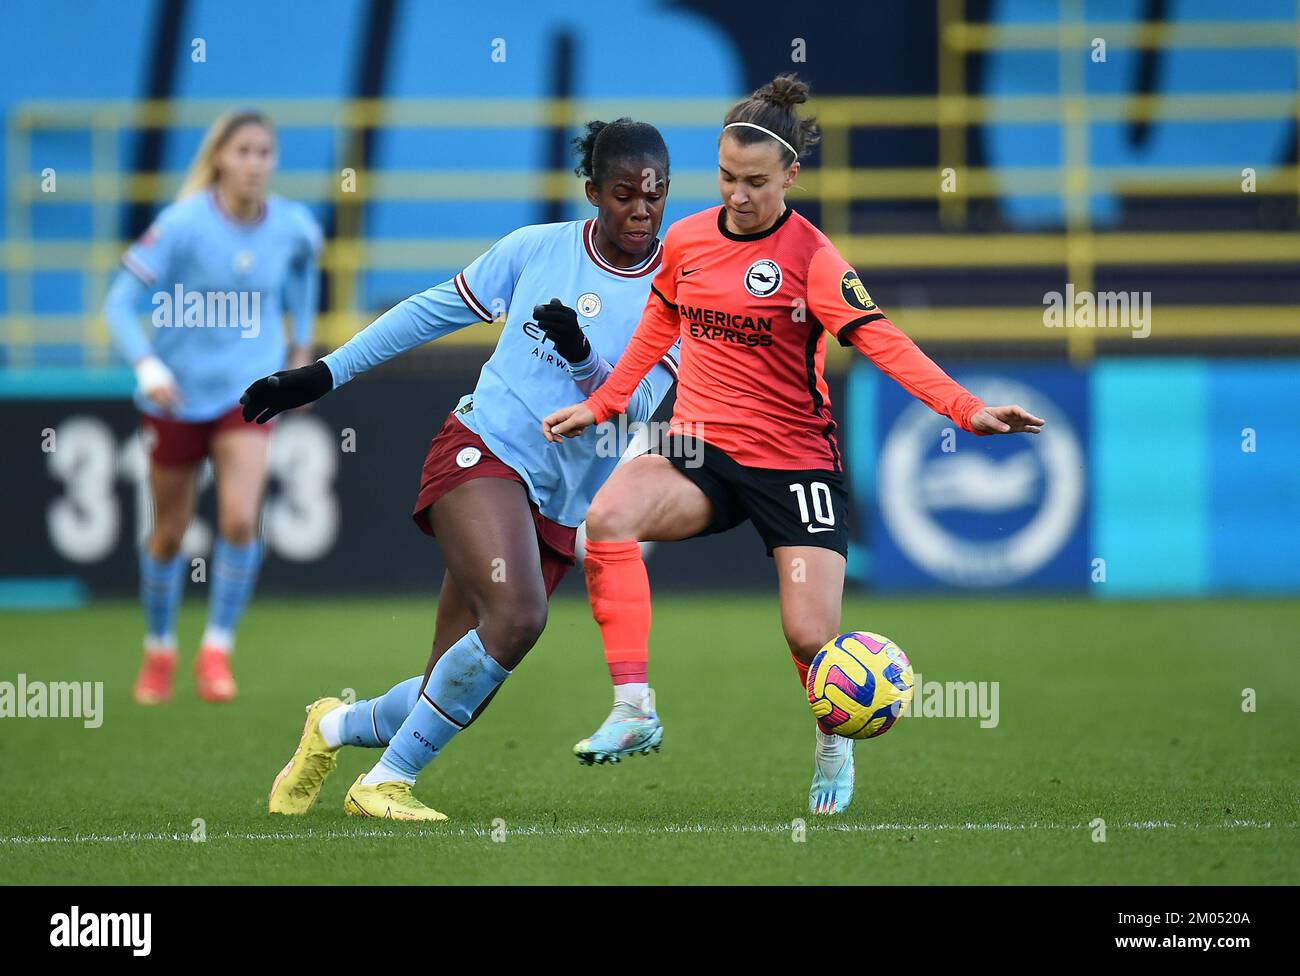 Manchester City's Khadija Shaw and Brighton and Hove Albion's Julia Zigiotti Olme battle for the ball during the Barclay Women's Super League match at the Manchester City Academy Stadium, Manchester. Picture date: Sunday December 4, 2022. Stock Photo